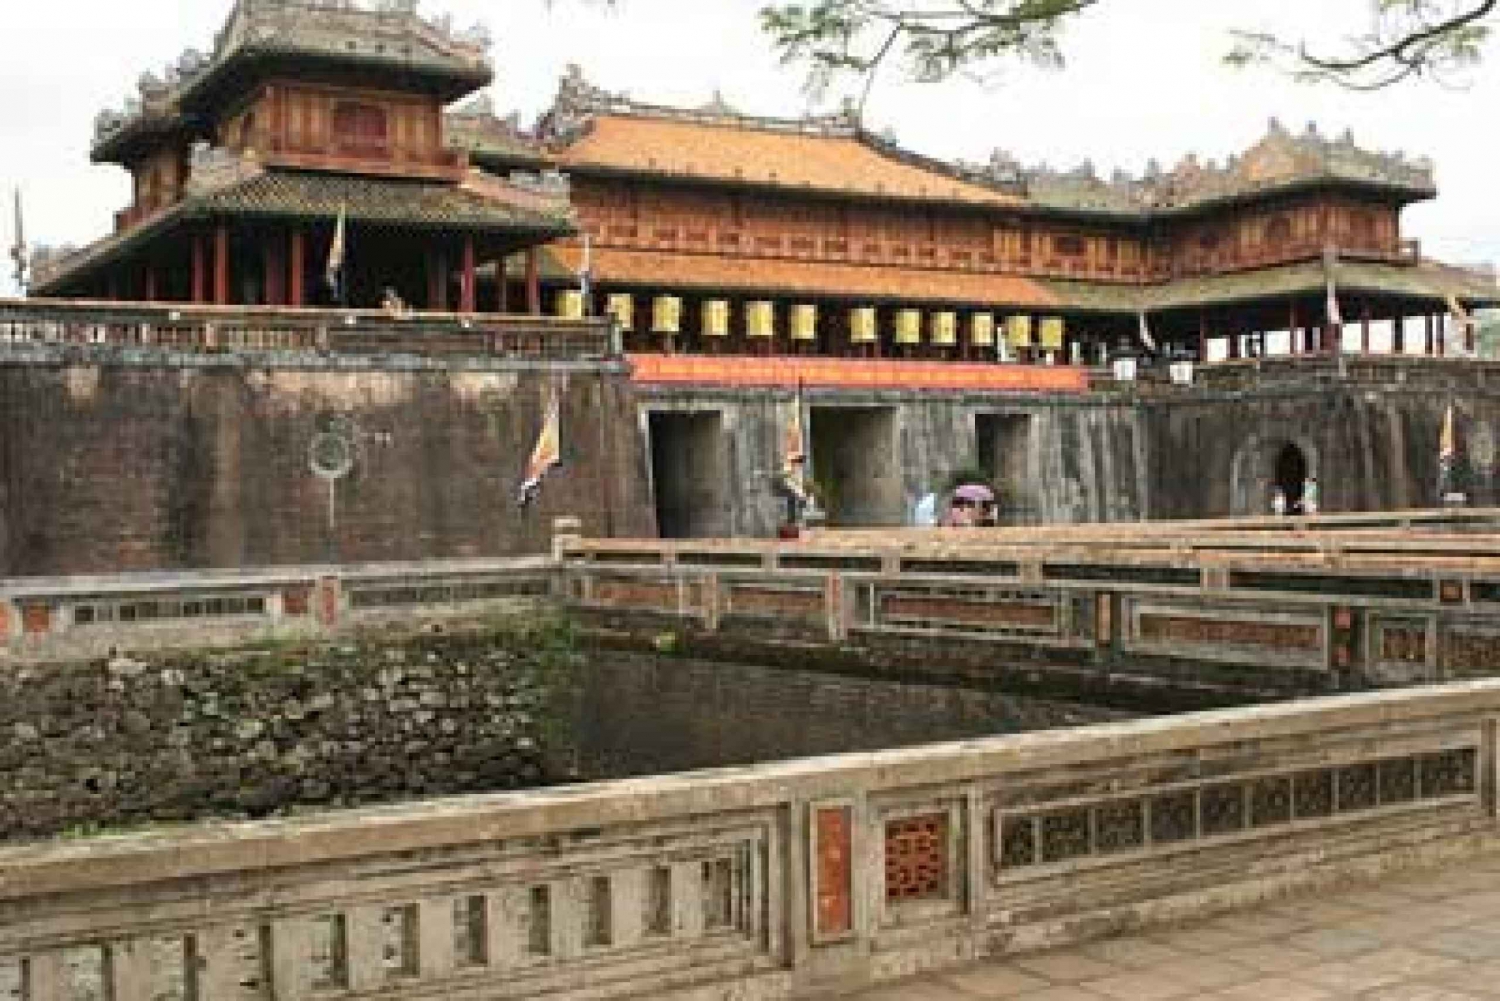 Hue Half-Day Tour with Boat Trip and Sightseeing